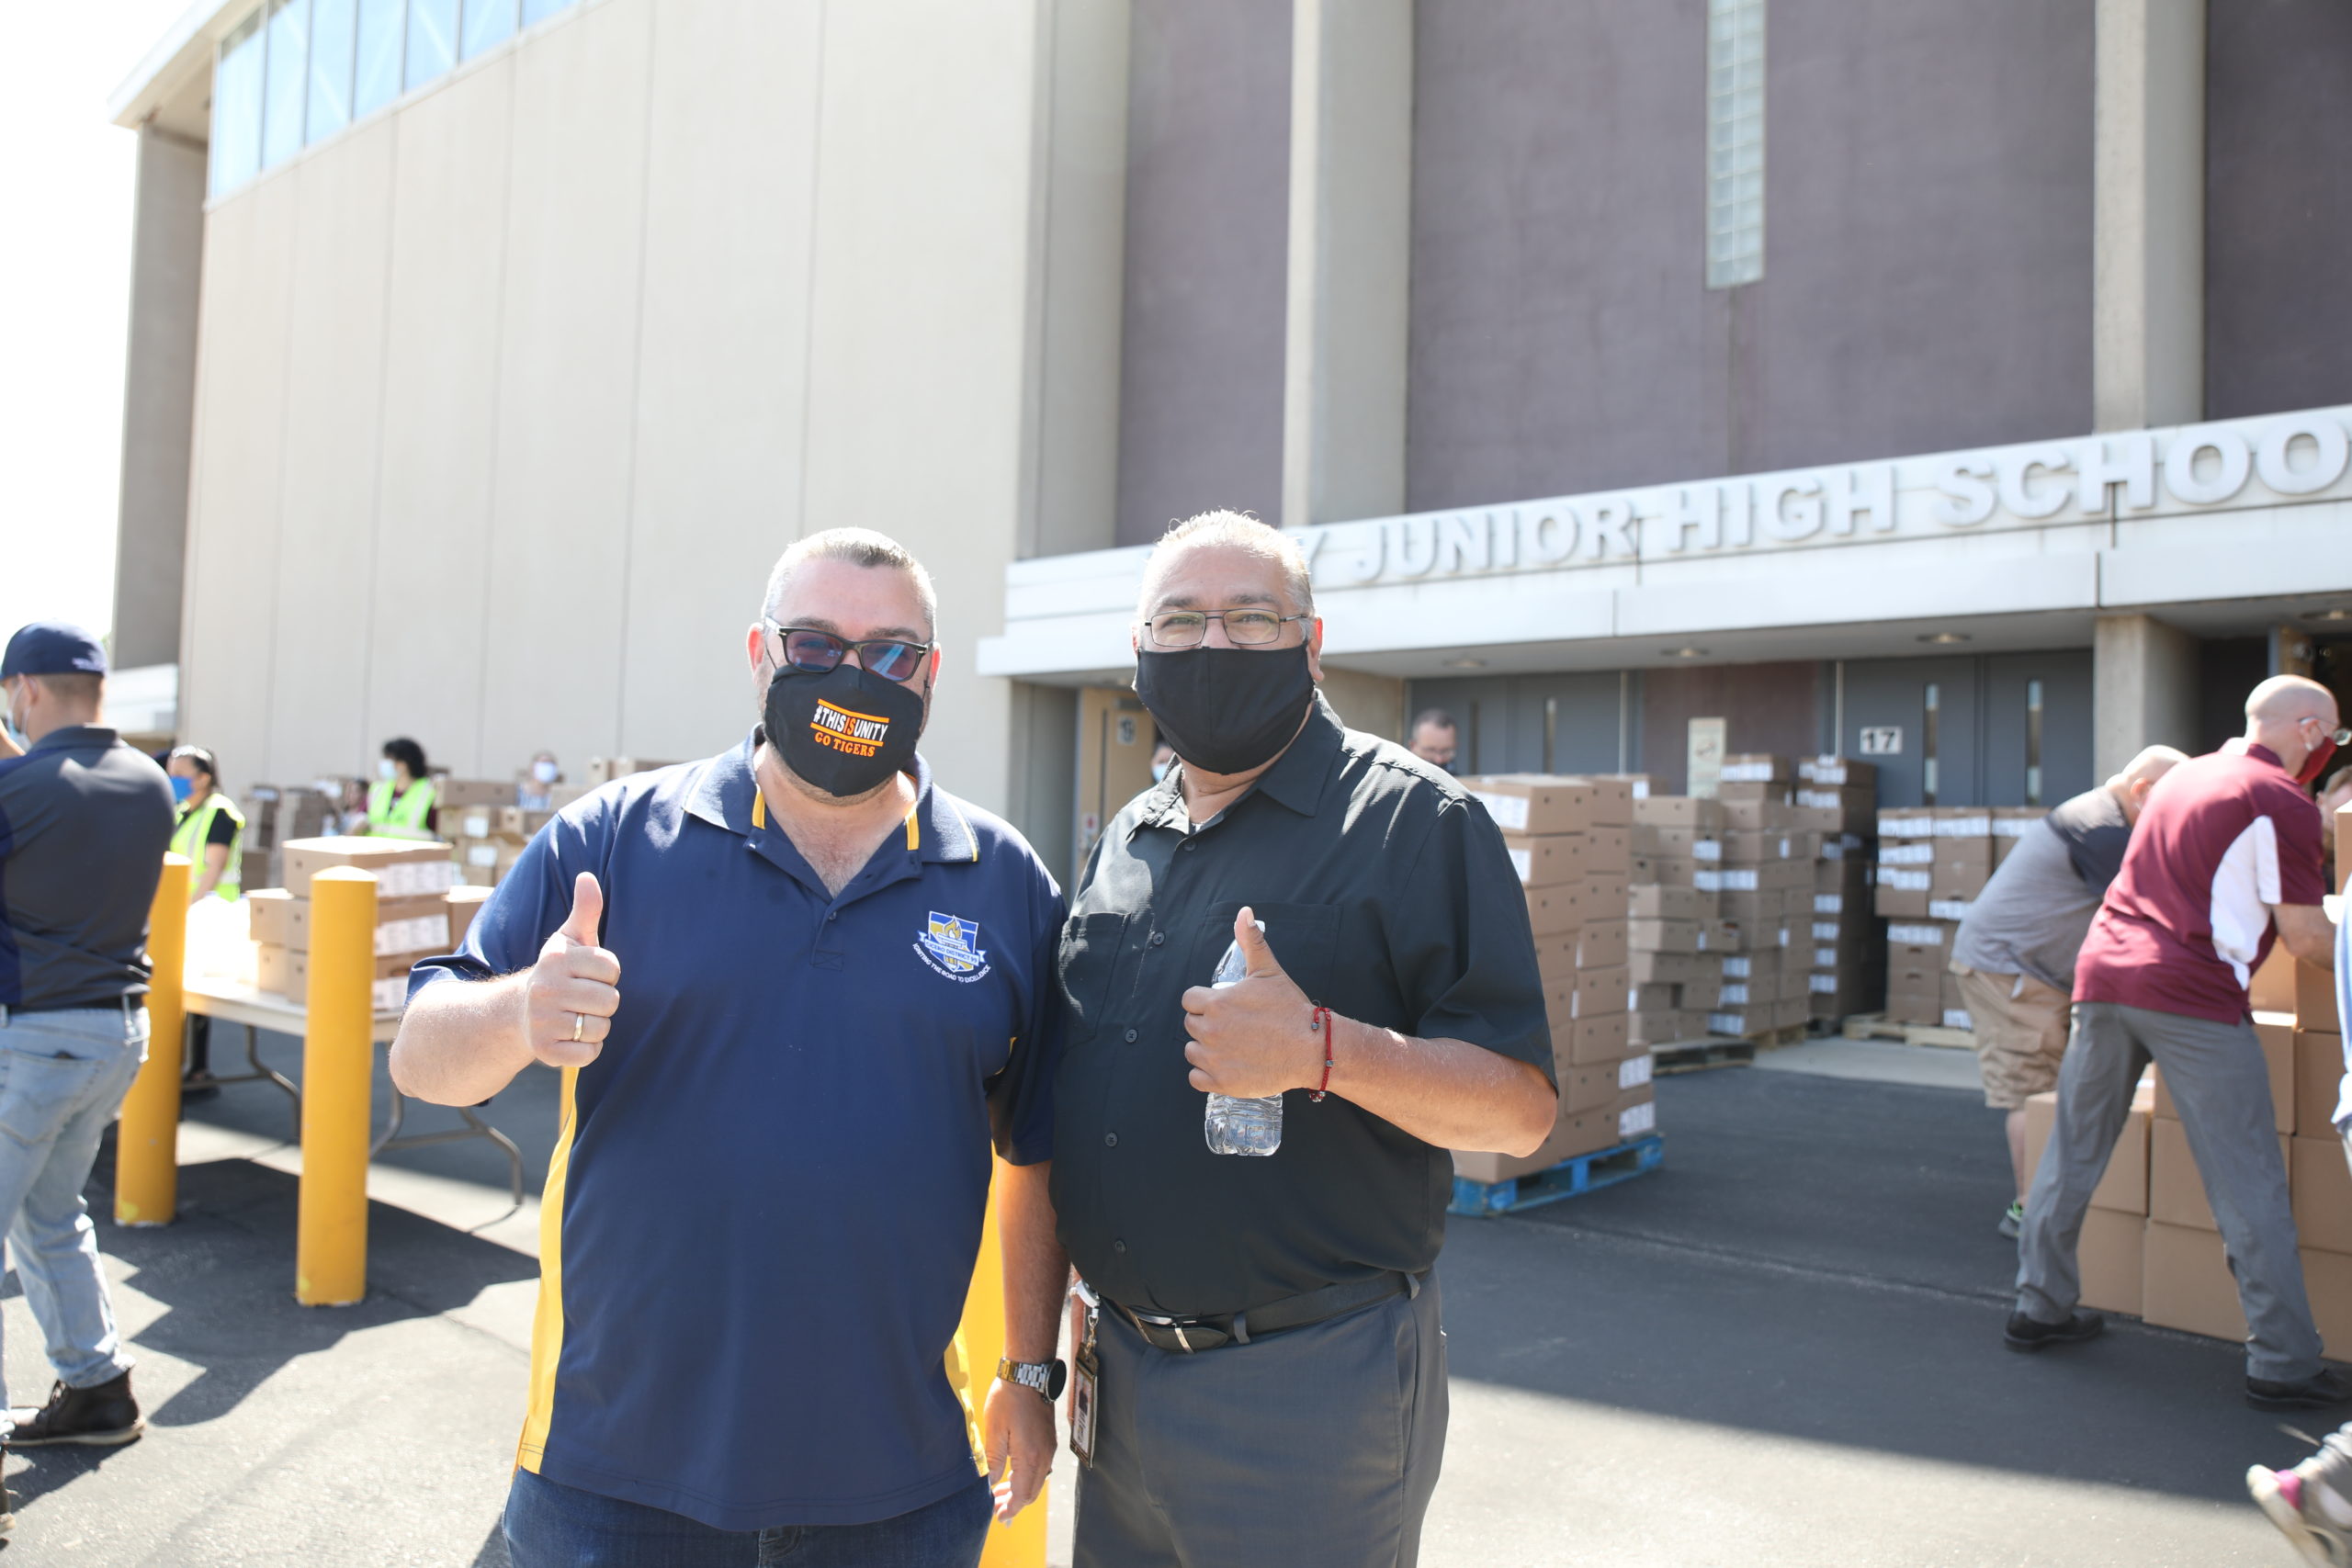 School District 99 Board Chairman Tom Tomschin and District 99 Supt. Rudy Hernandez distributing food to needy families at Unity Junior High school Thursday June 25, 2020. Photo courtesy of the Town of Cicero